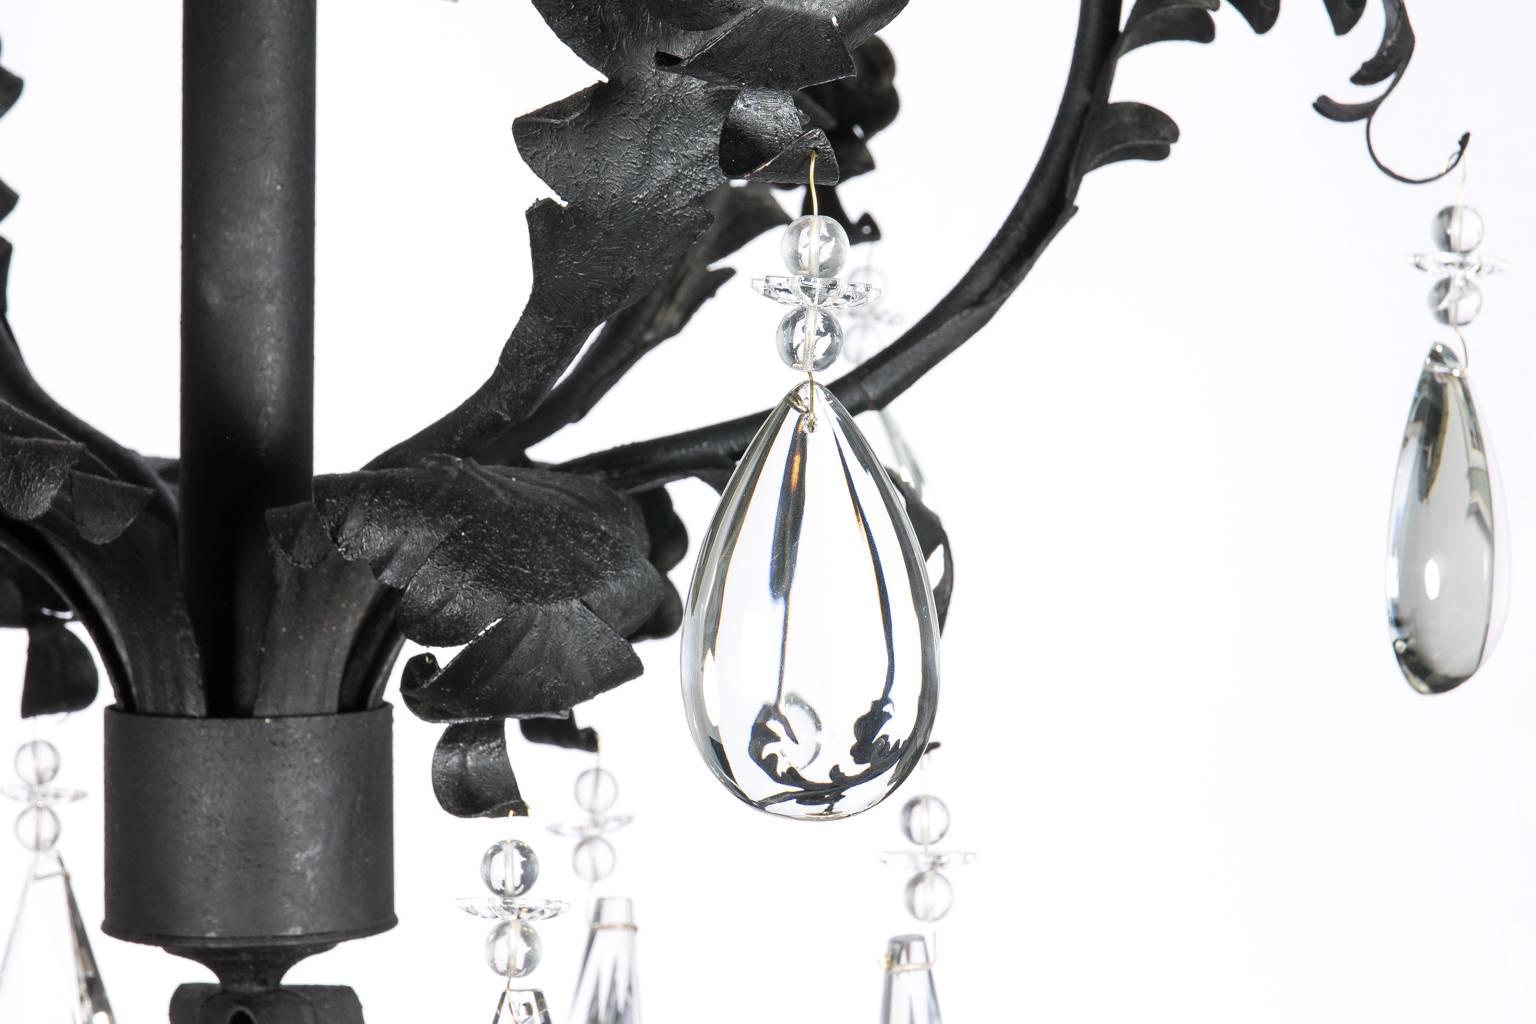 Six black wrought iron foliate arms with brass details and large-scale crystal pendants, circa 1990s. Maker: Harte lighting, USA.
 